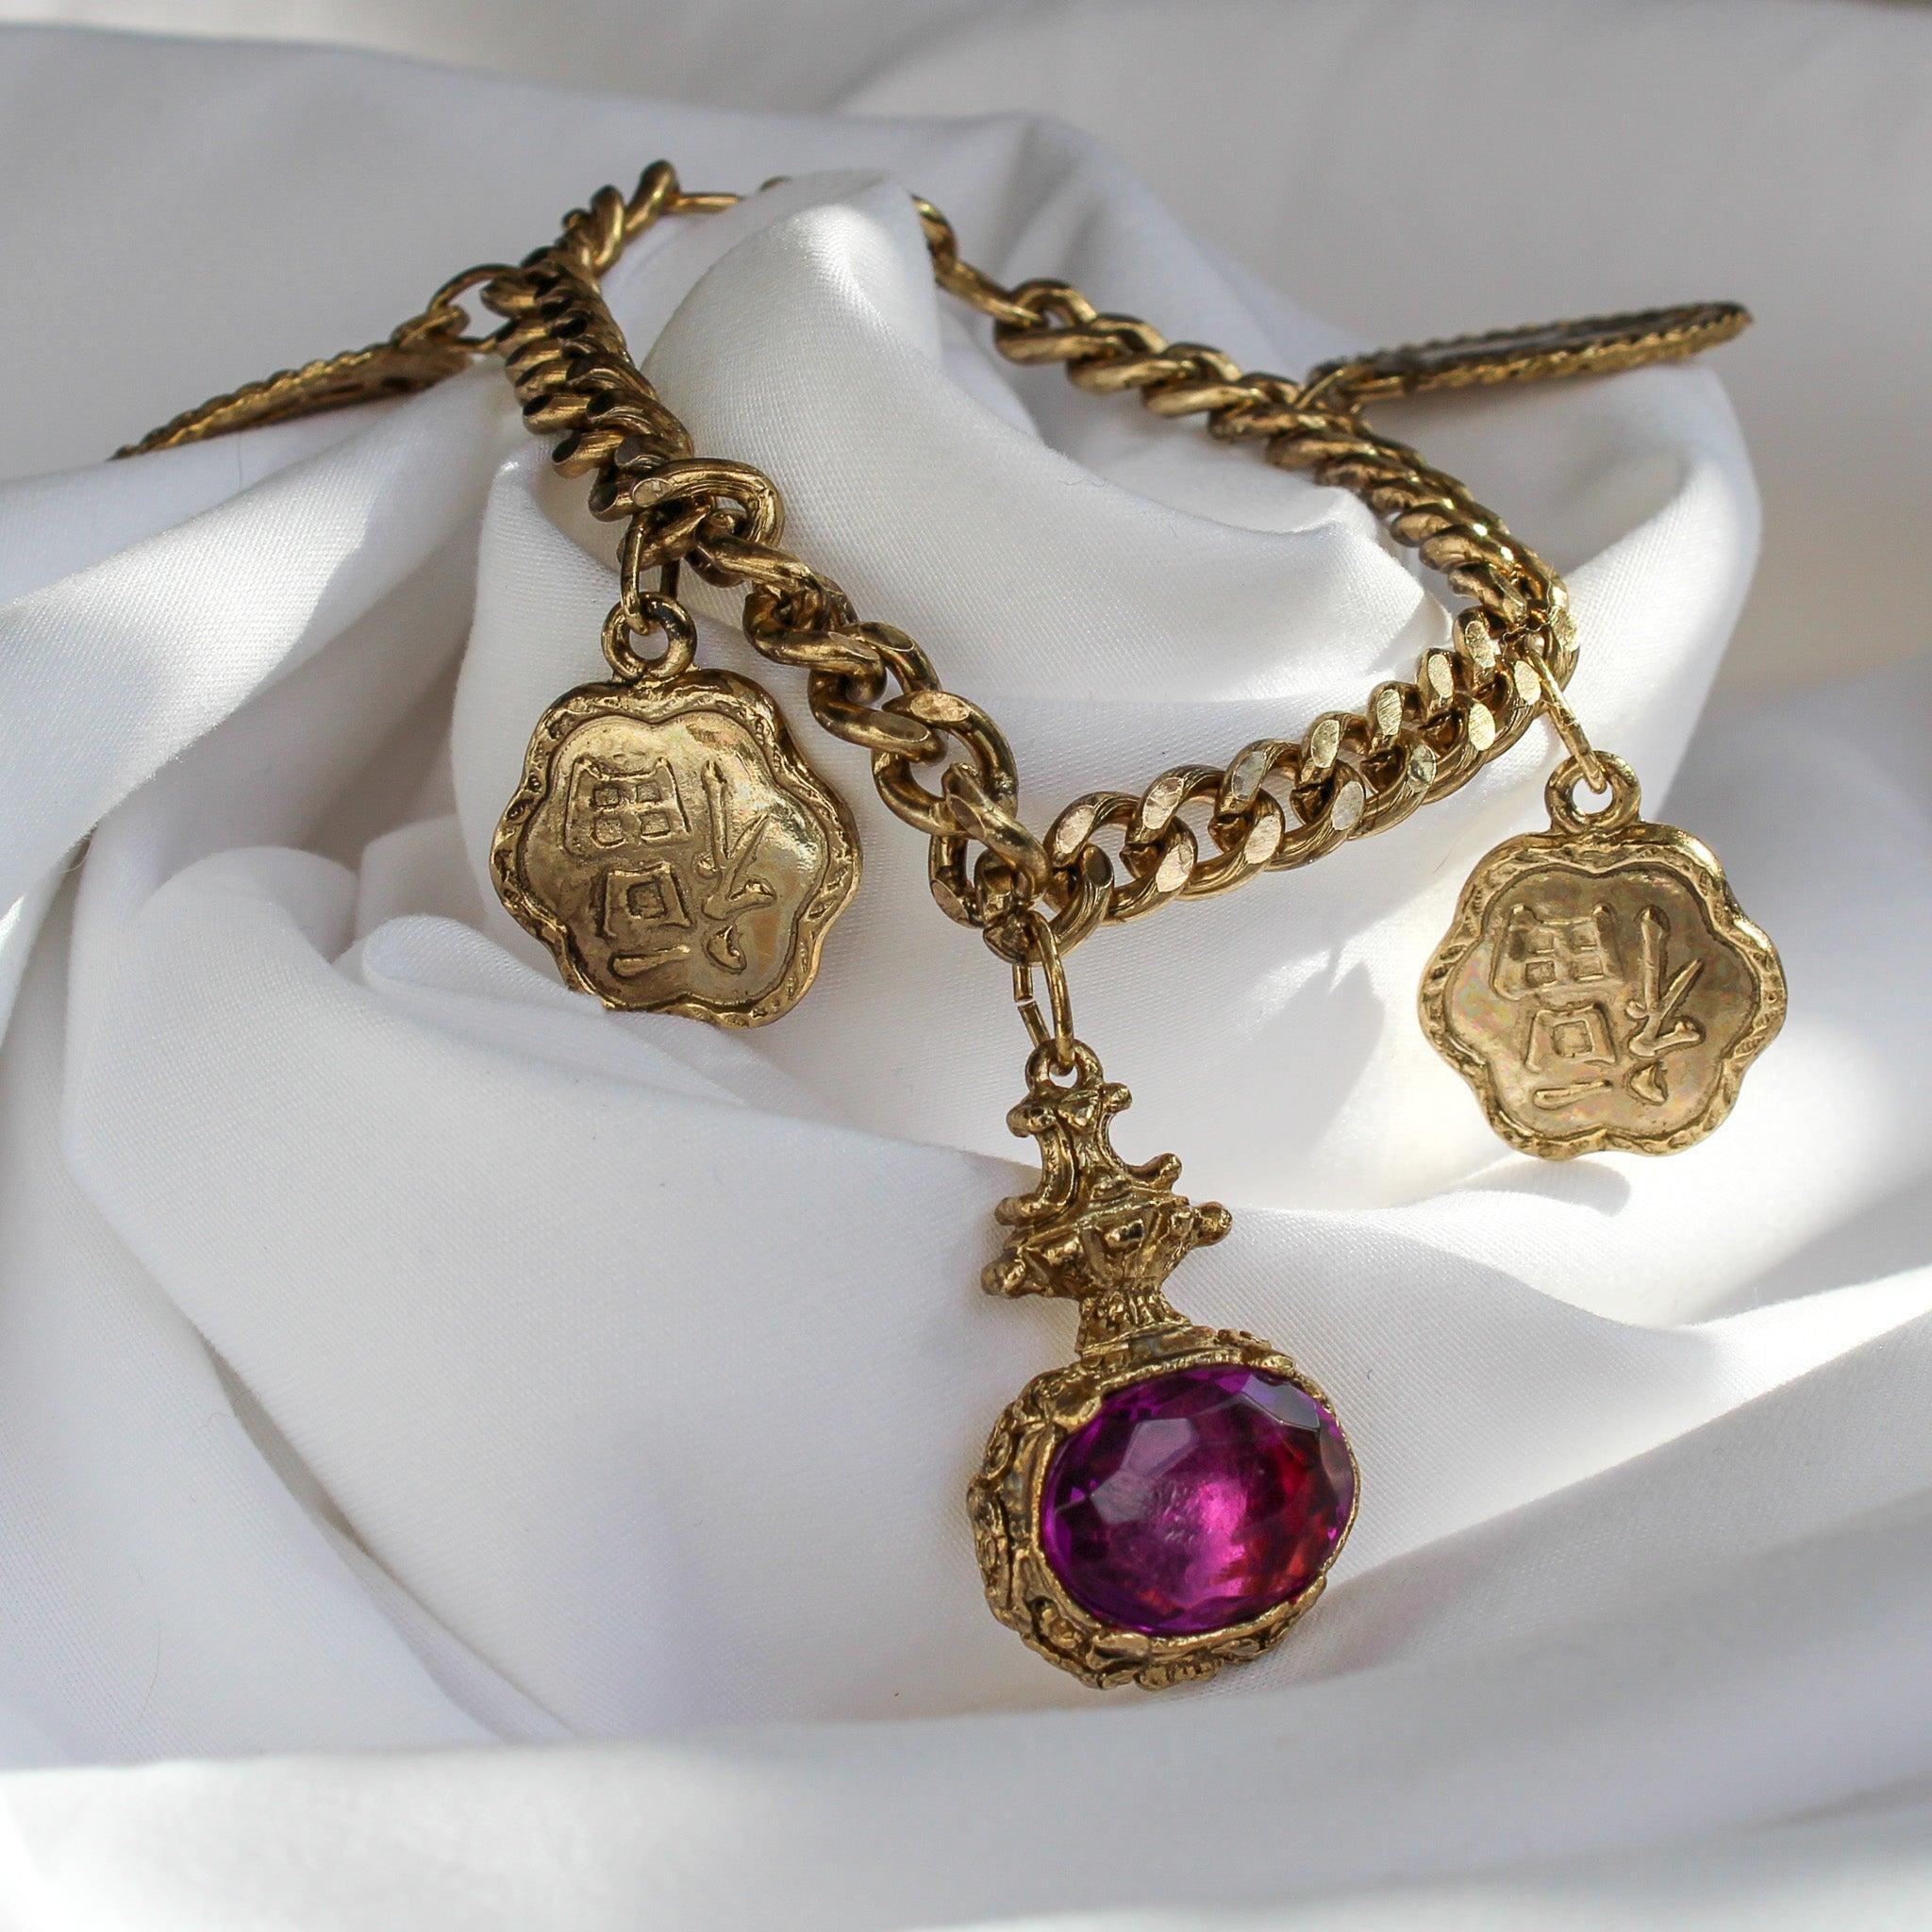 Vintage 1980s Charm Bracelet
 
Meet this effortlessly cool vintage 1980s charm bracelet, carefully crafted in the UK from high-quality materials . This stylish piece features a chunky gold-plated curb chain, adorned with eye-catching large coin